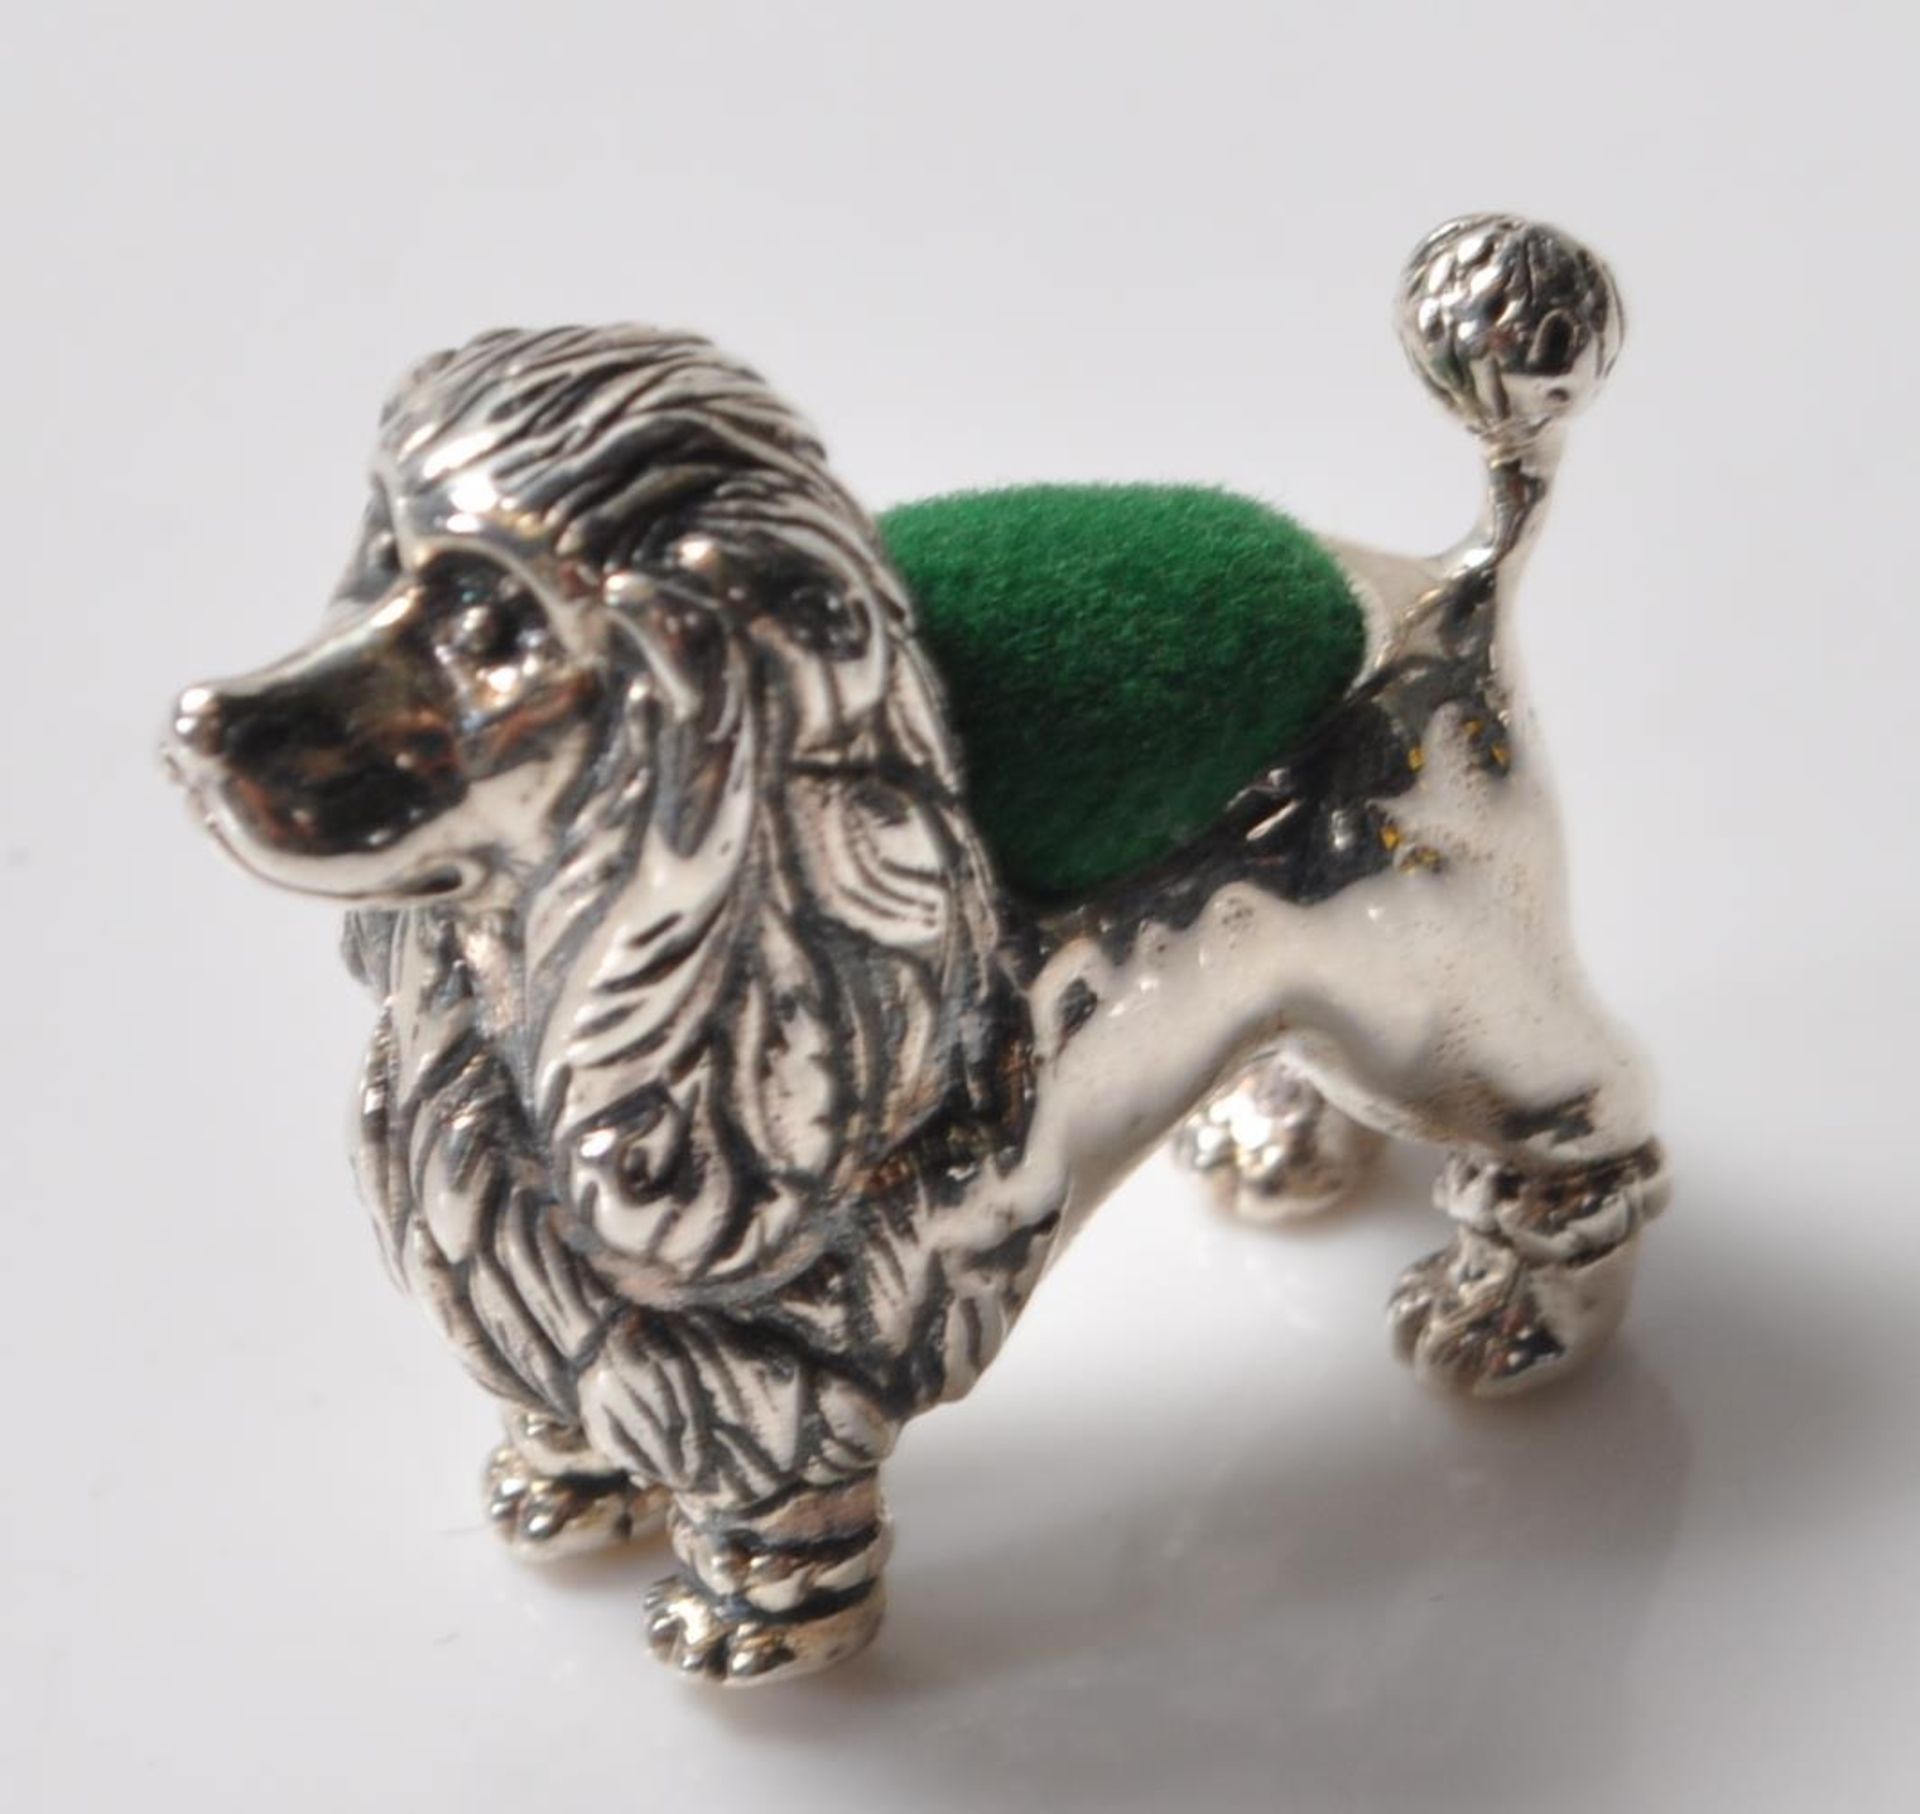 STAMPED 925 SILVER PIN CUSHION IN THE FORM OF A POODLE.